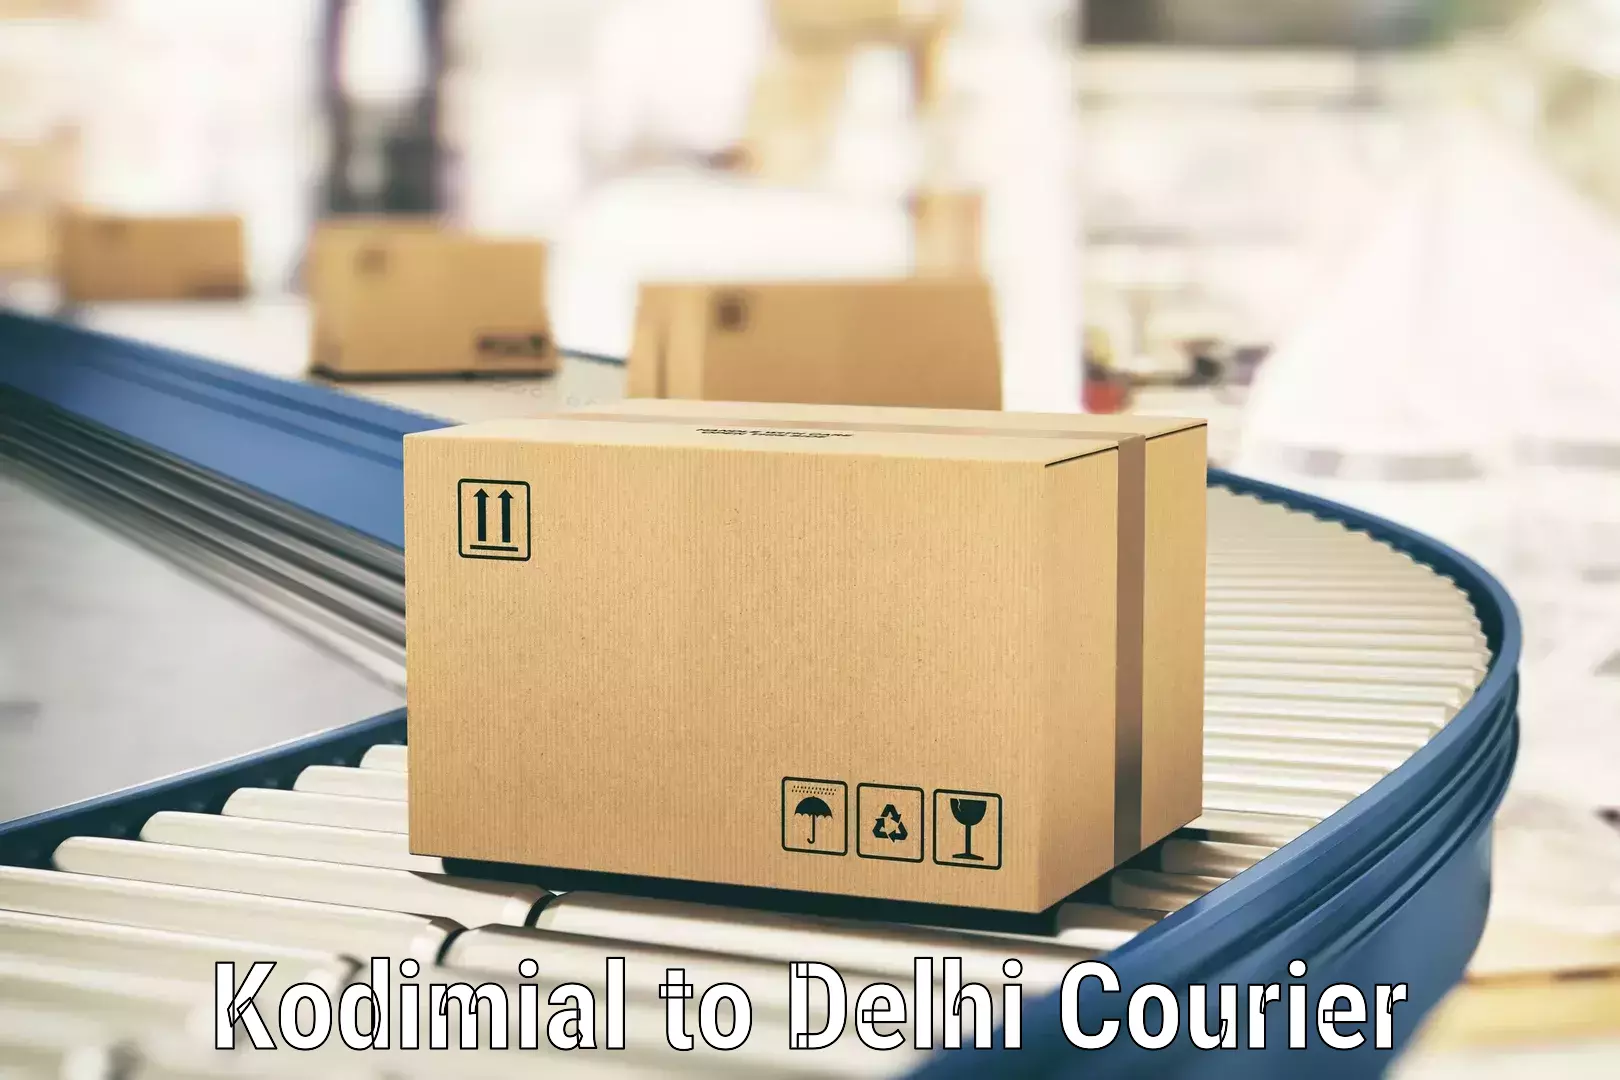 Express package transport Kodimial to East Delhi